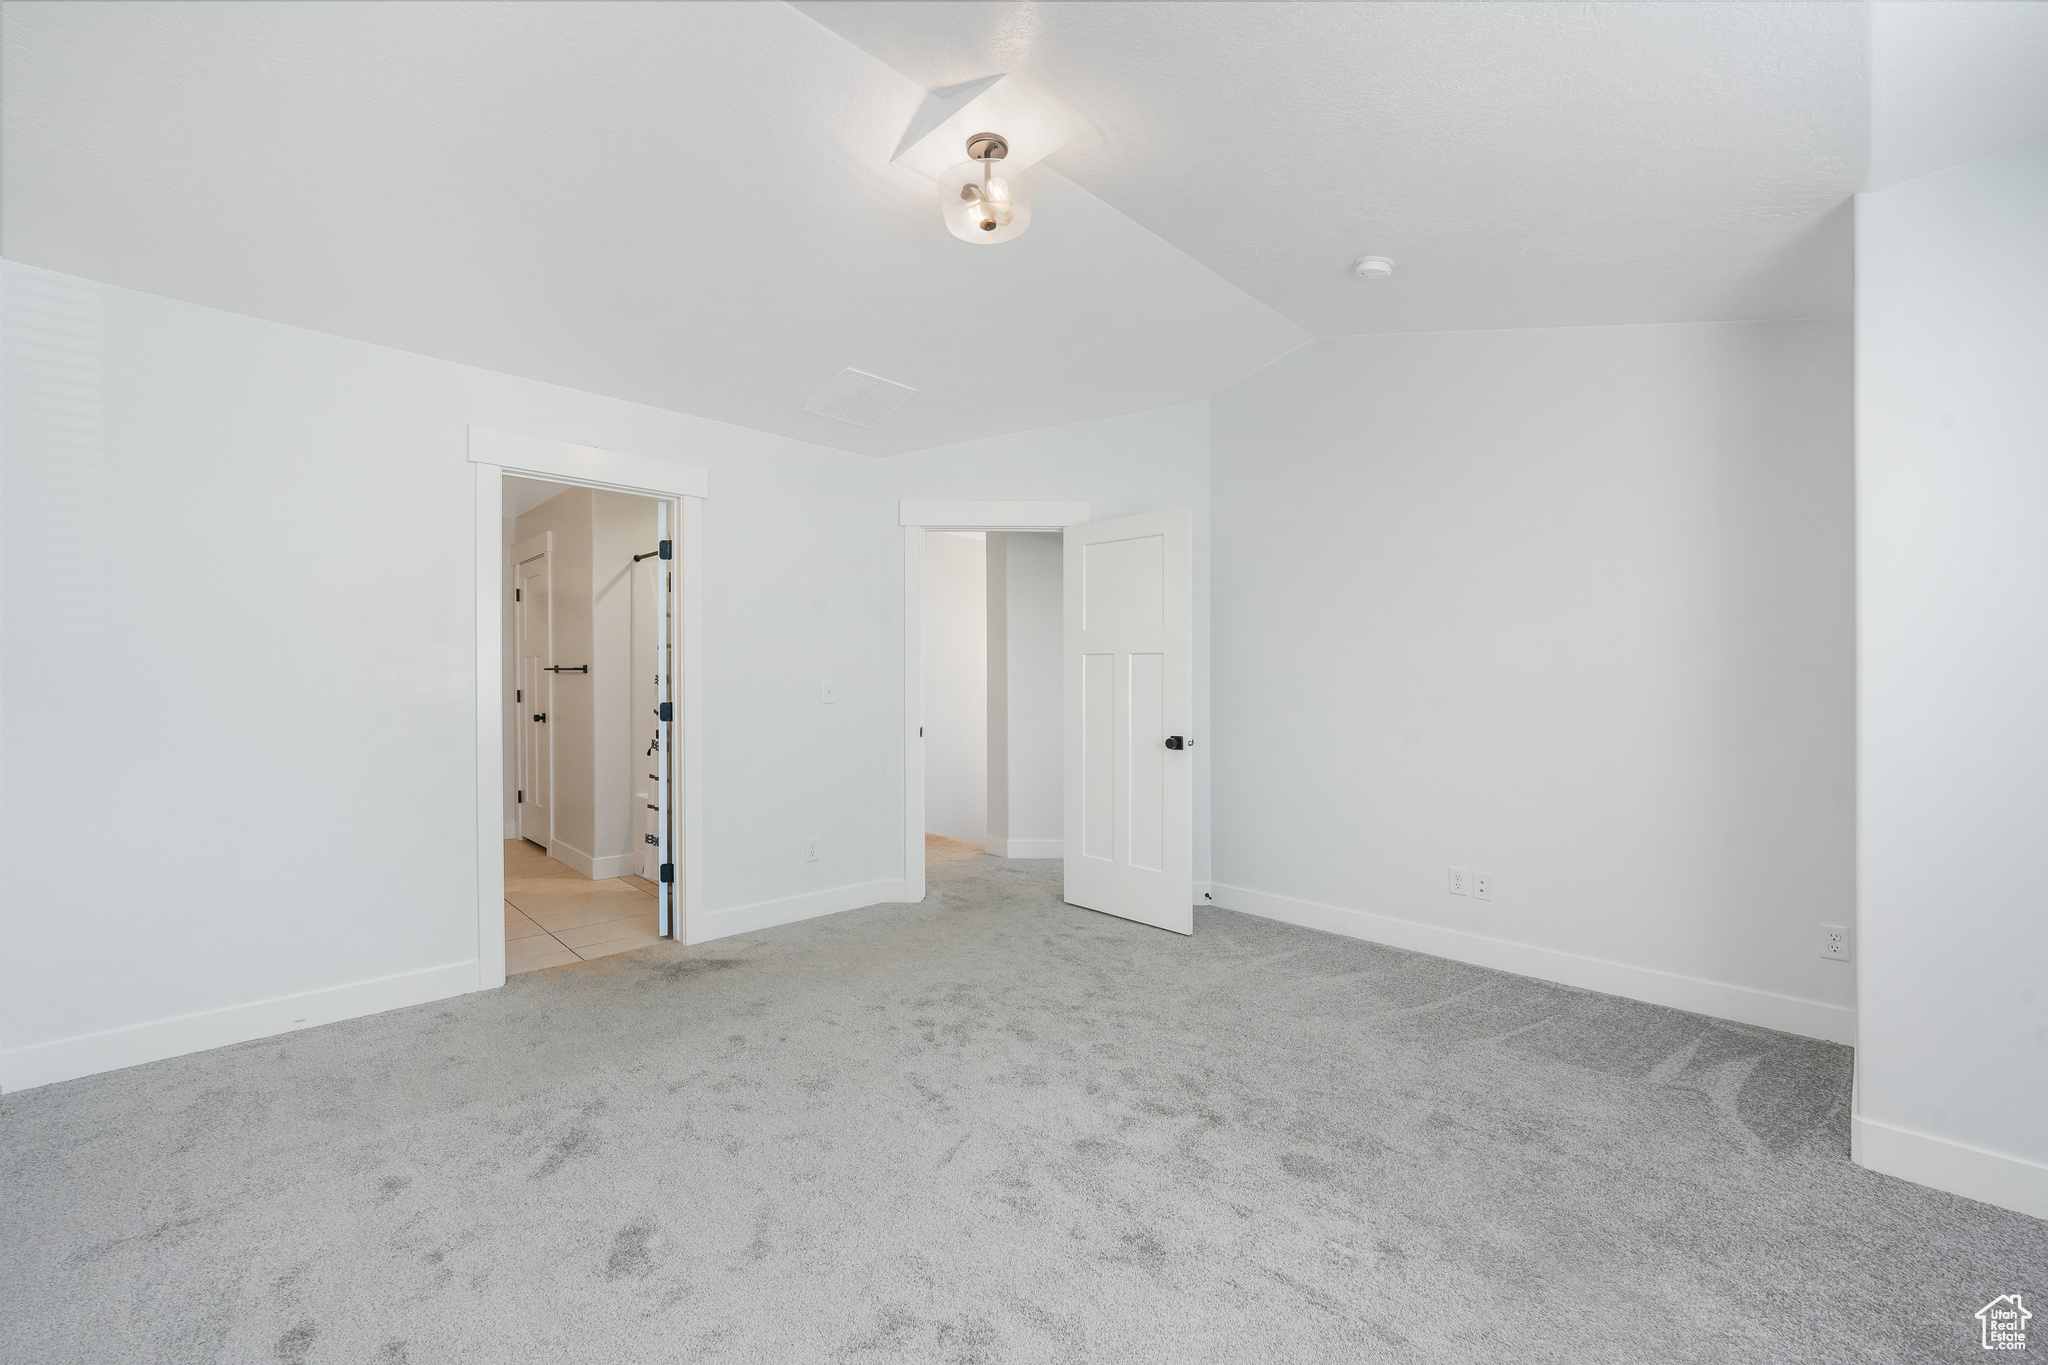 Unfurnished bedroom with light colored carpet and lofted ceiling